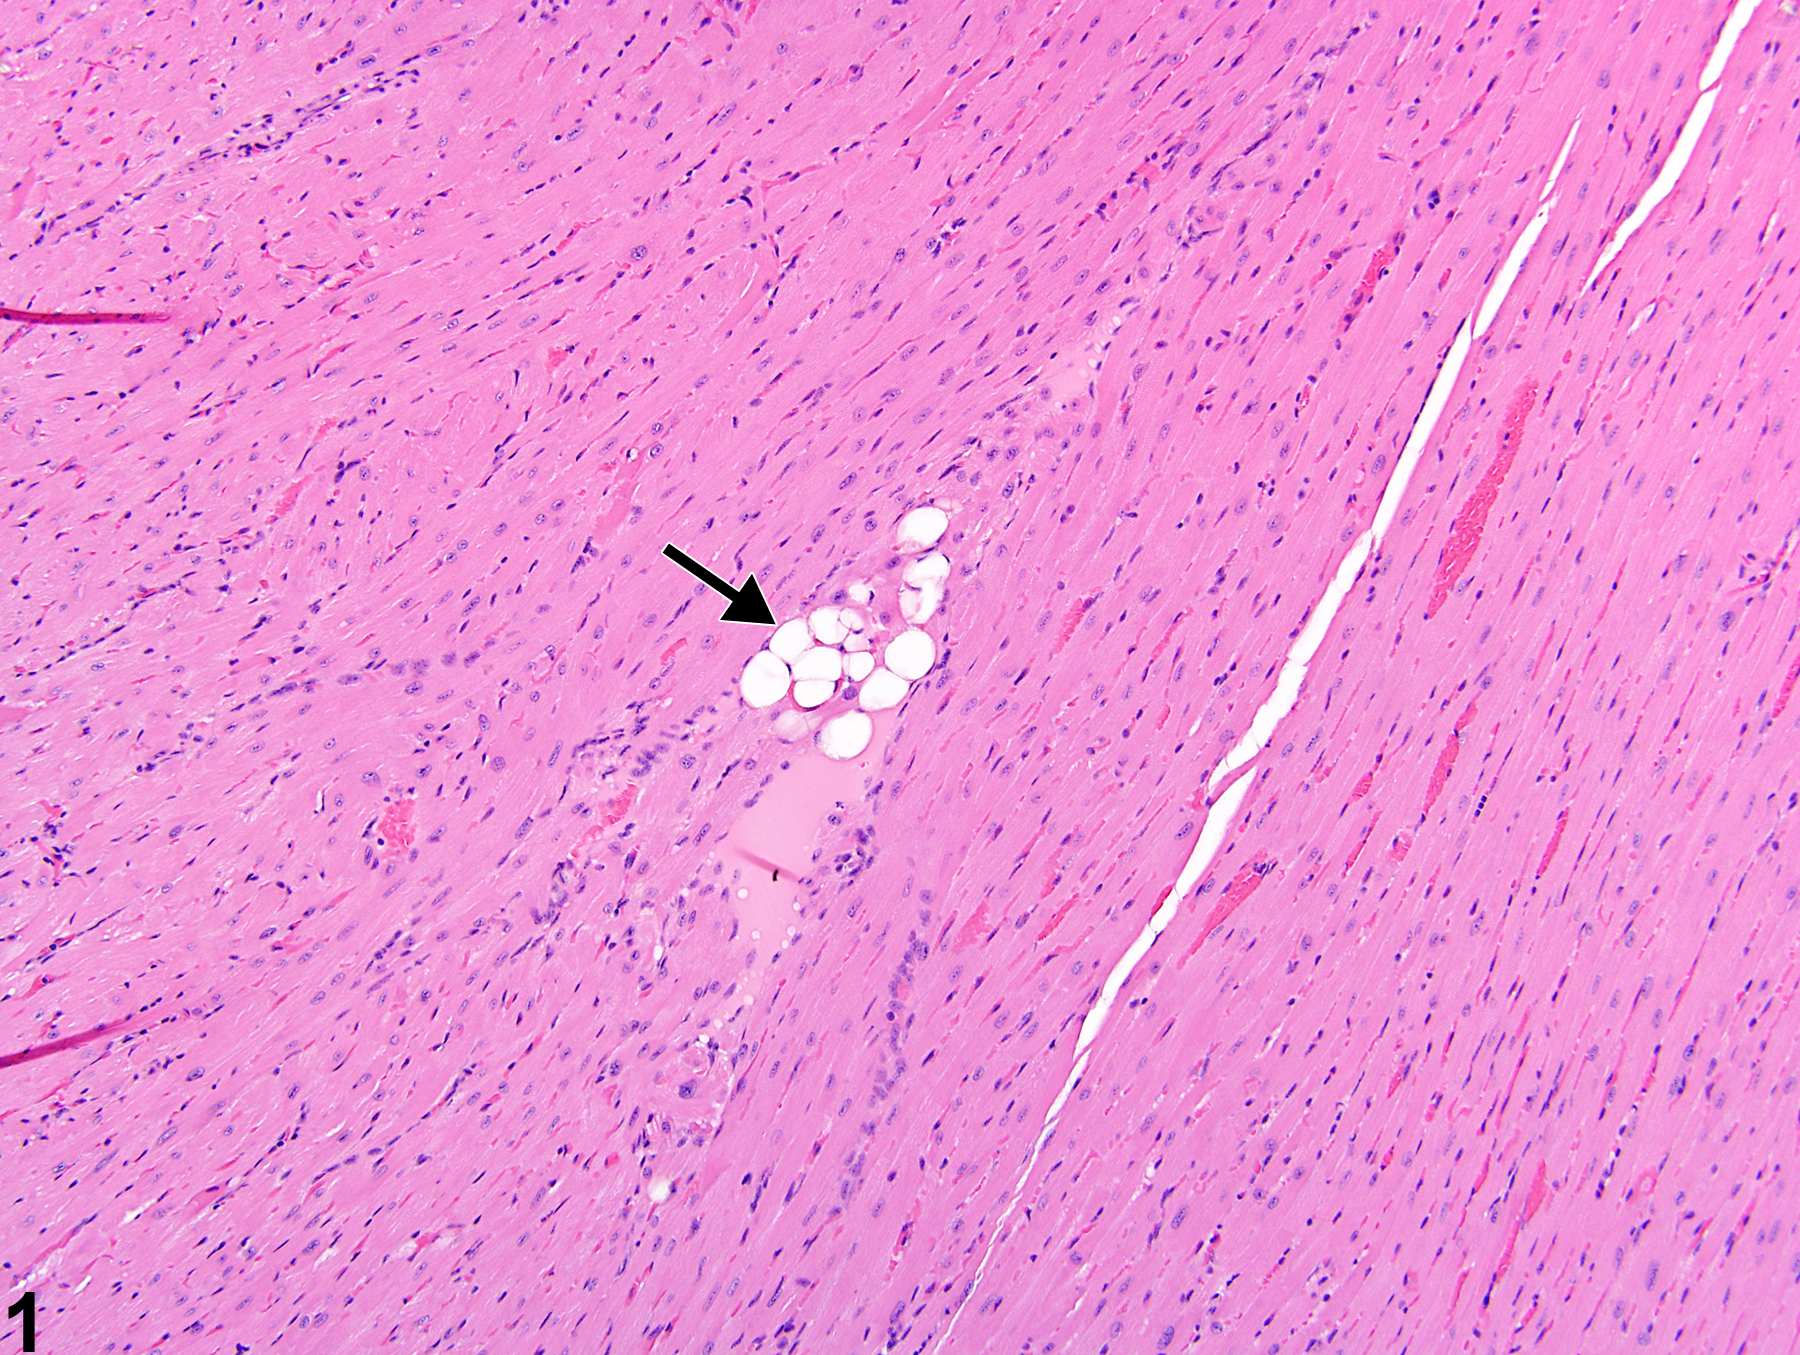 Image of vacuolization, cytoplasmic in the heart, myocardium from a female B6C3F1/N mouse in a subchronic study